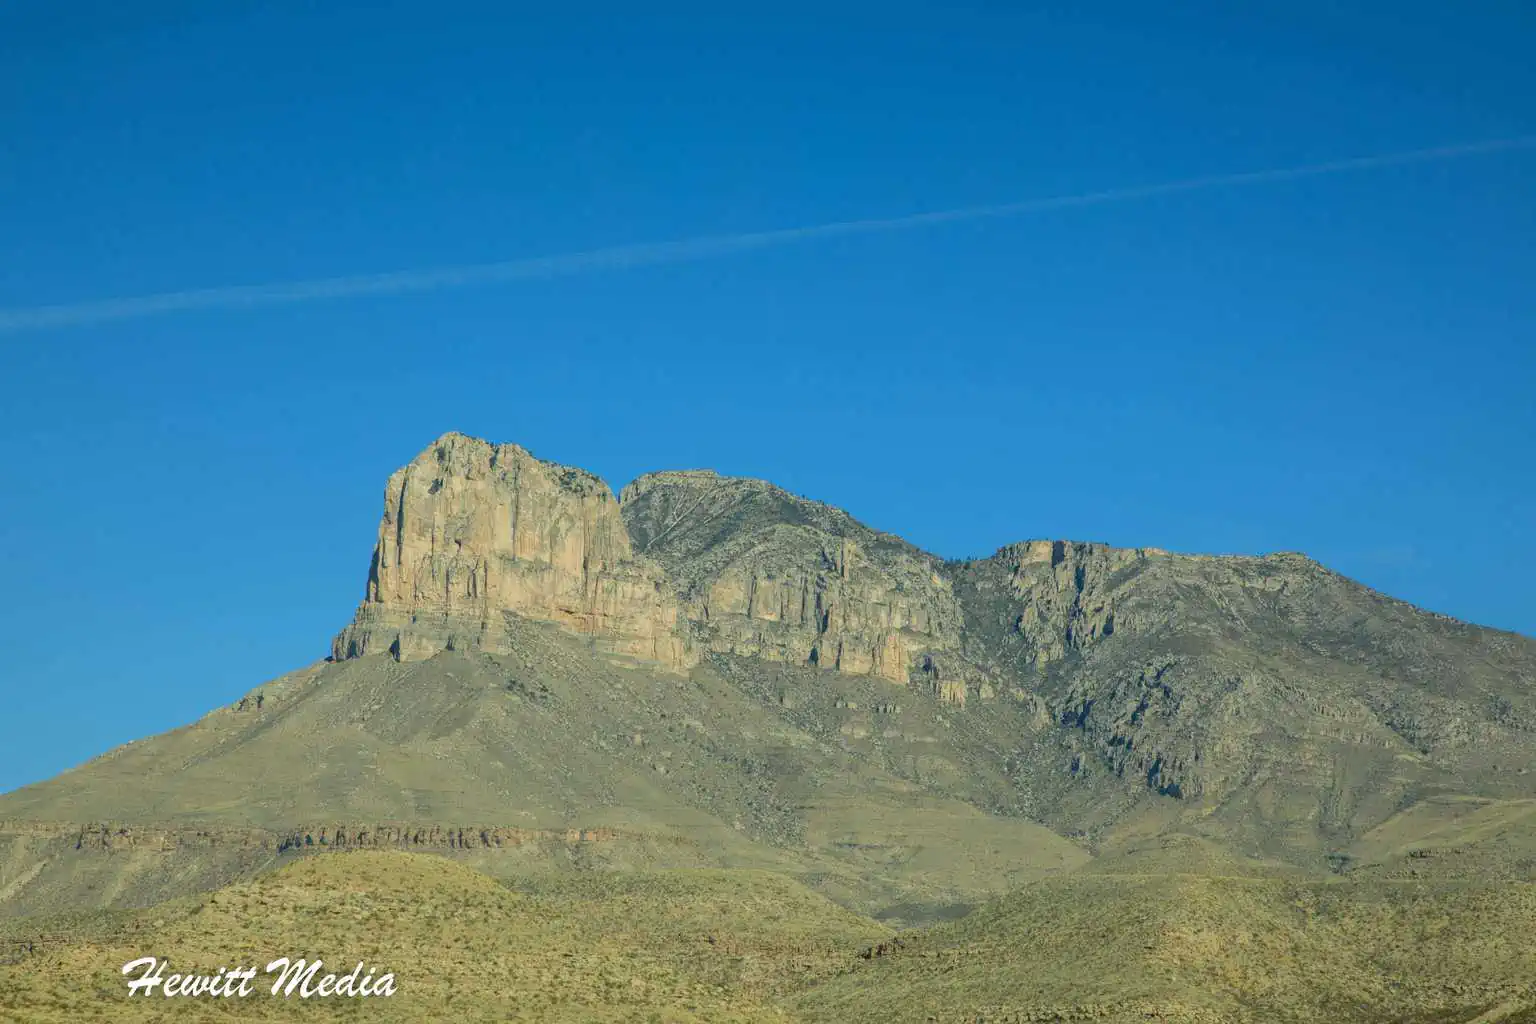 Best Hikes in the National Parks - Guadalupe Peak in Guadalupe Mountains